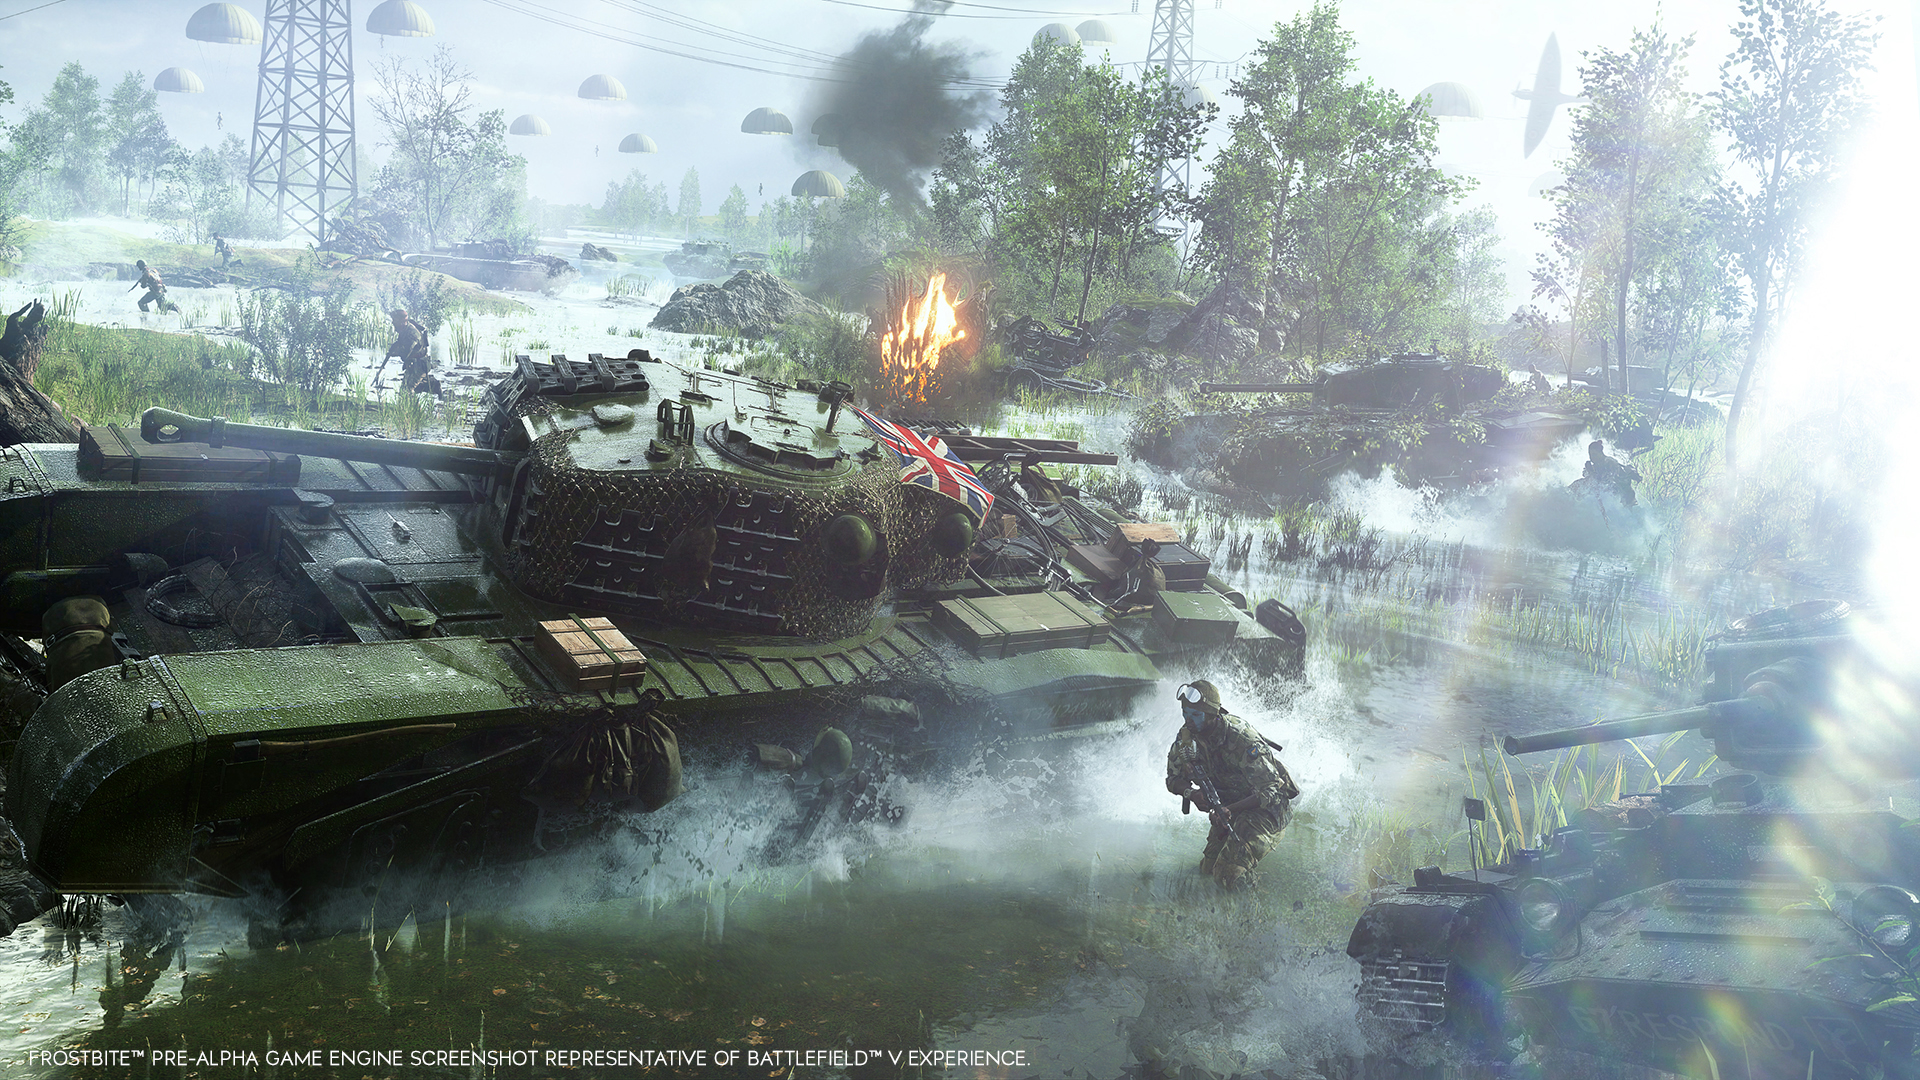 How Battlefield V Will Depict WWII as You Have Never Seen It Before